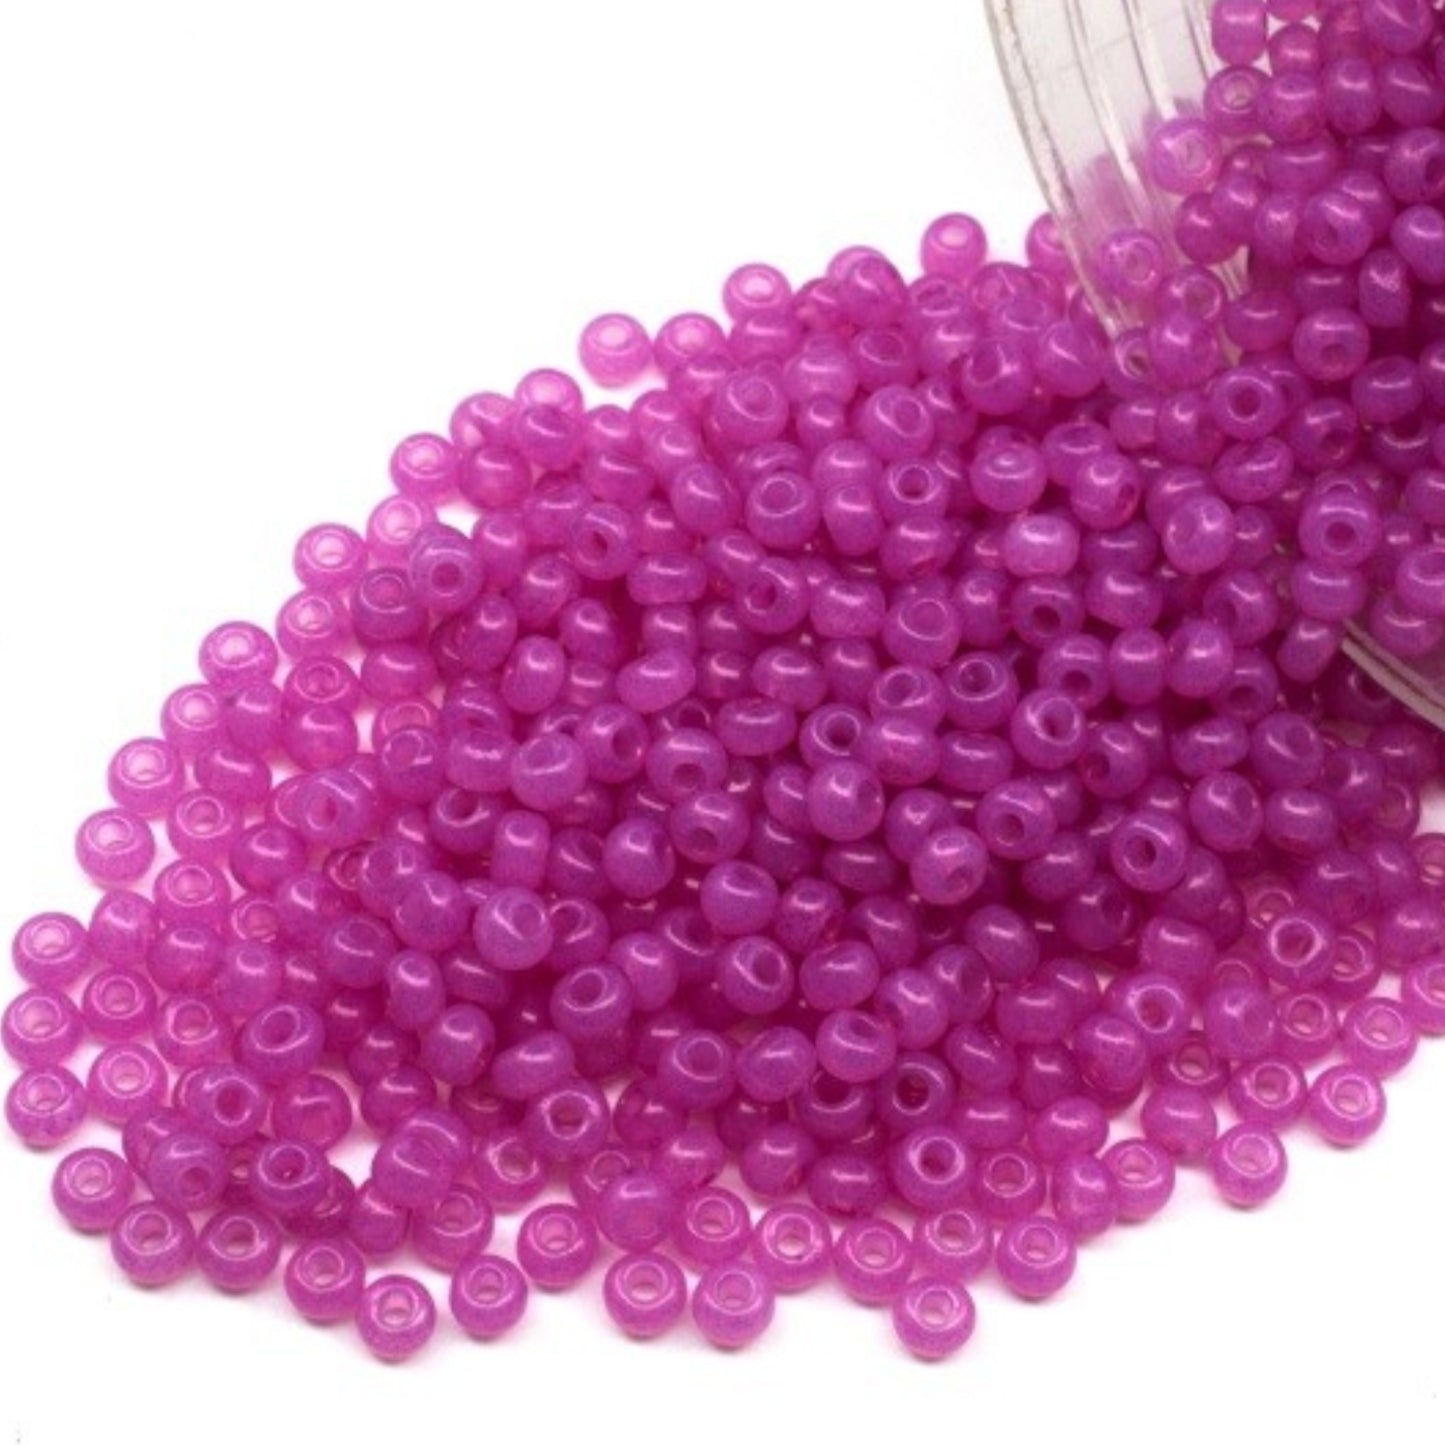 02692 Czech seed beads PRECIOSA round 10/0 lilac. Alabaster - Solgel Dyed.